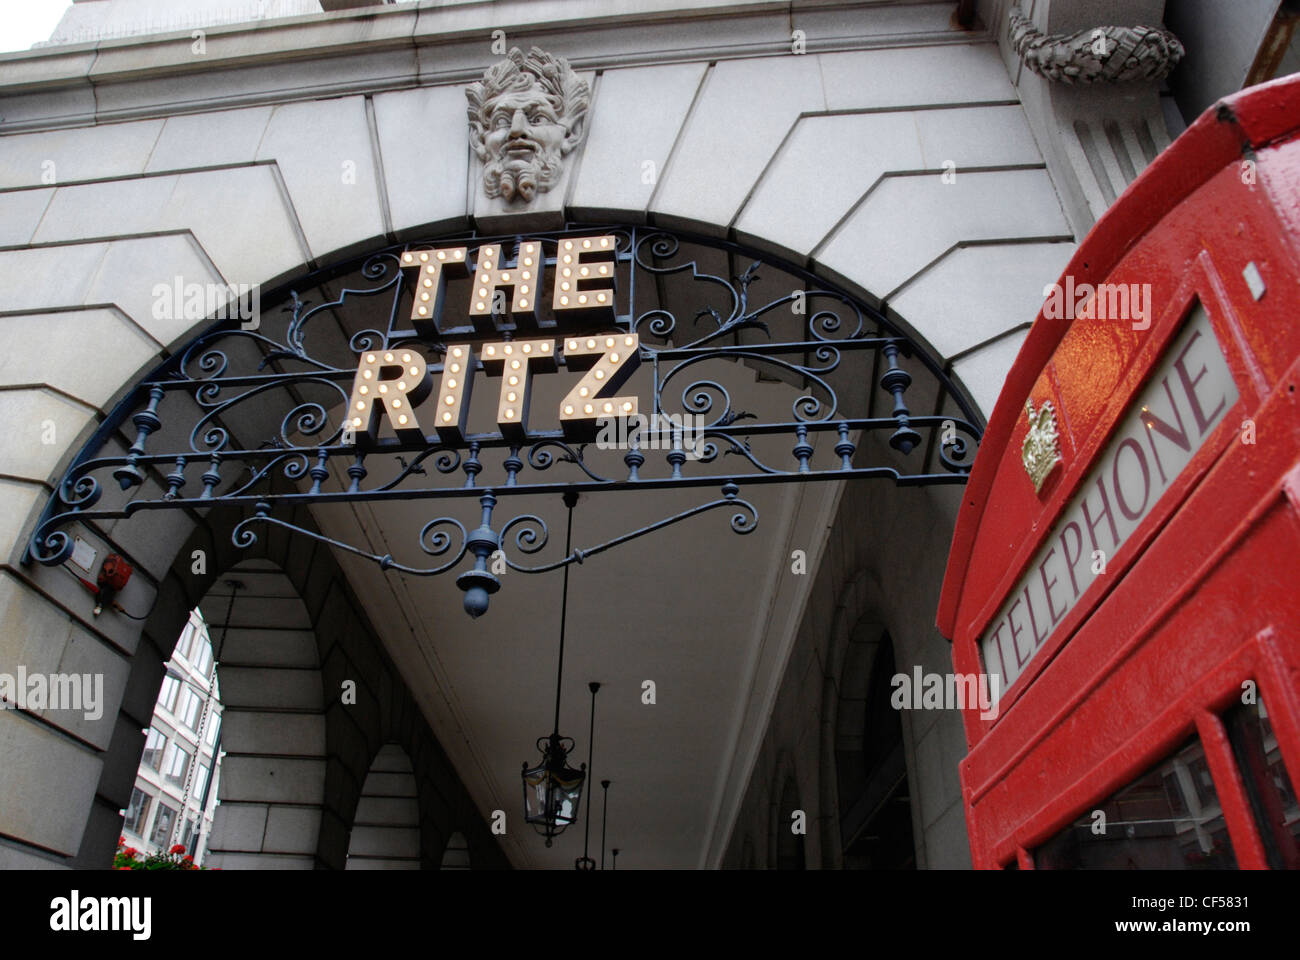 Exterior view of Signage for The Ritz Hotel in Piccadilly. Stock Photo